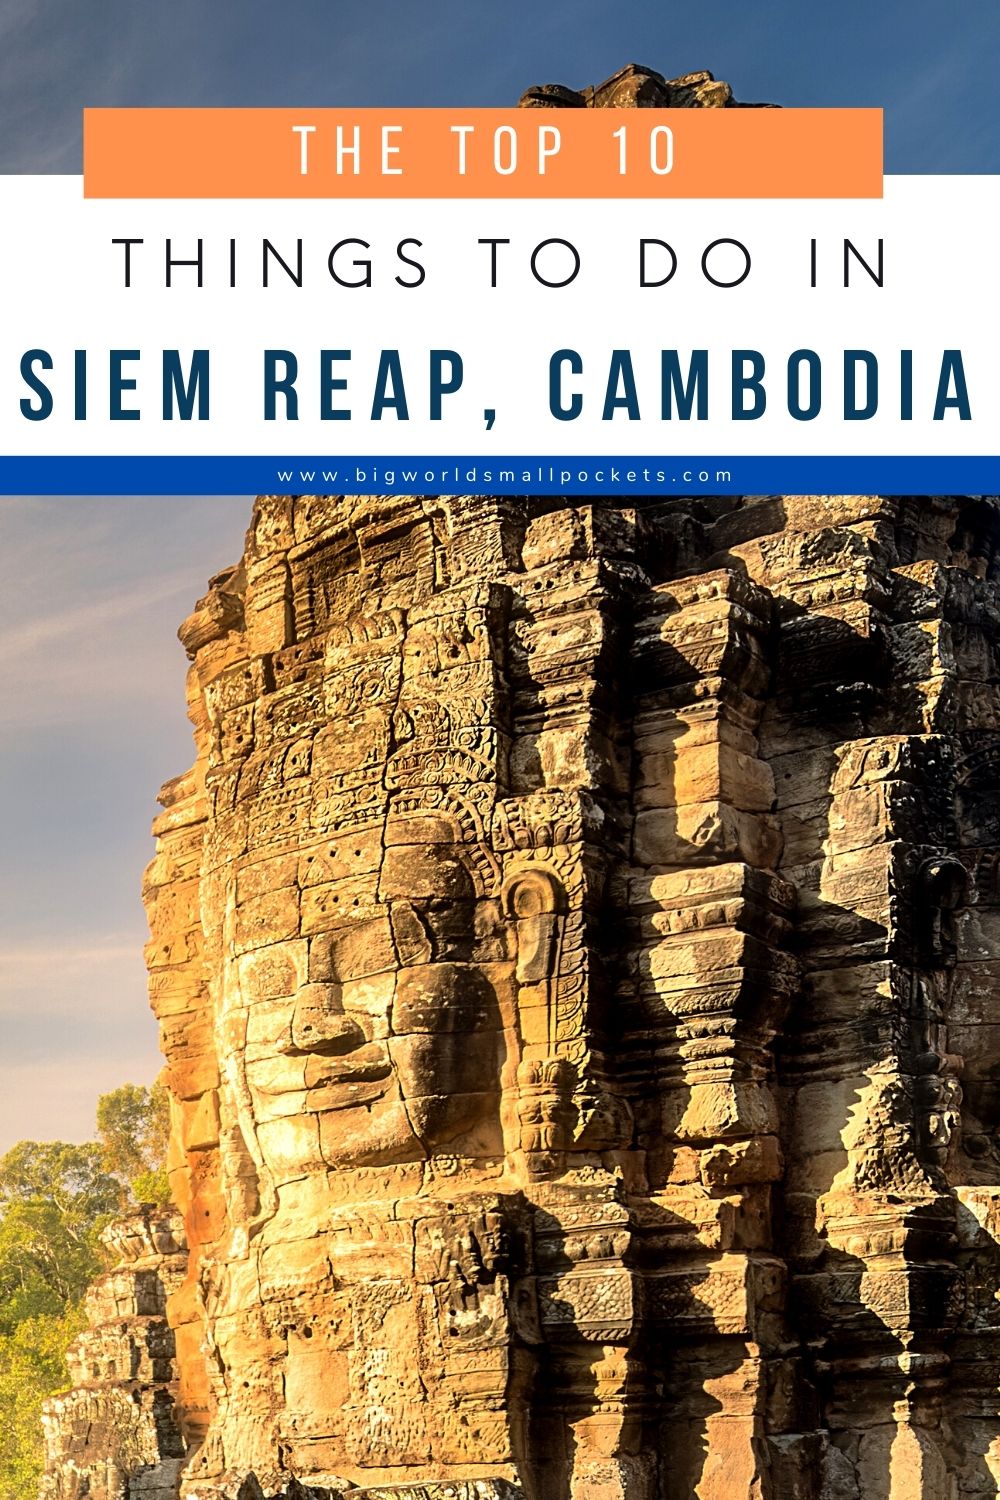 The 10 Best Things to Do in Siem Reap, Cambodia